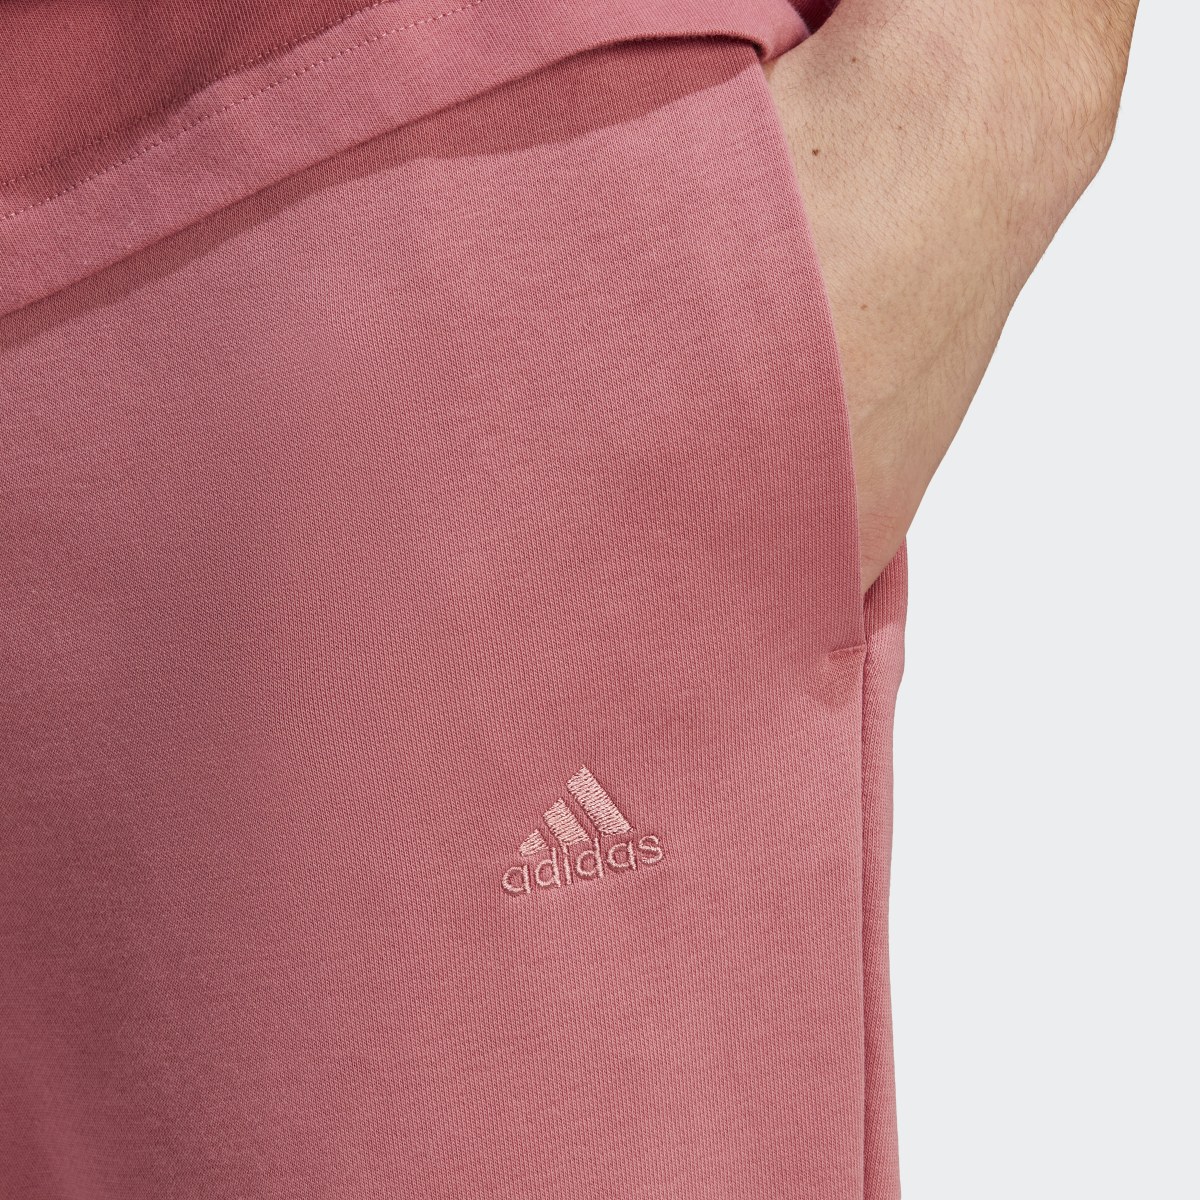 Adidas ALL SZN French Terry Joggers. 5